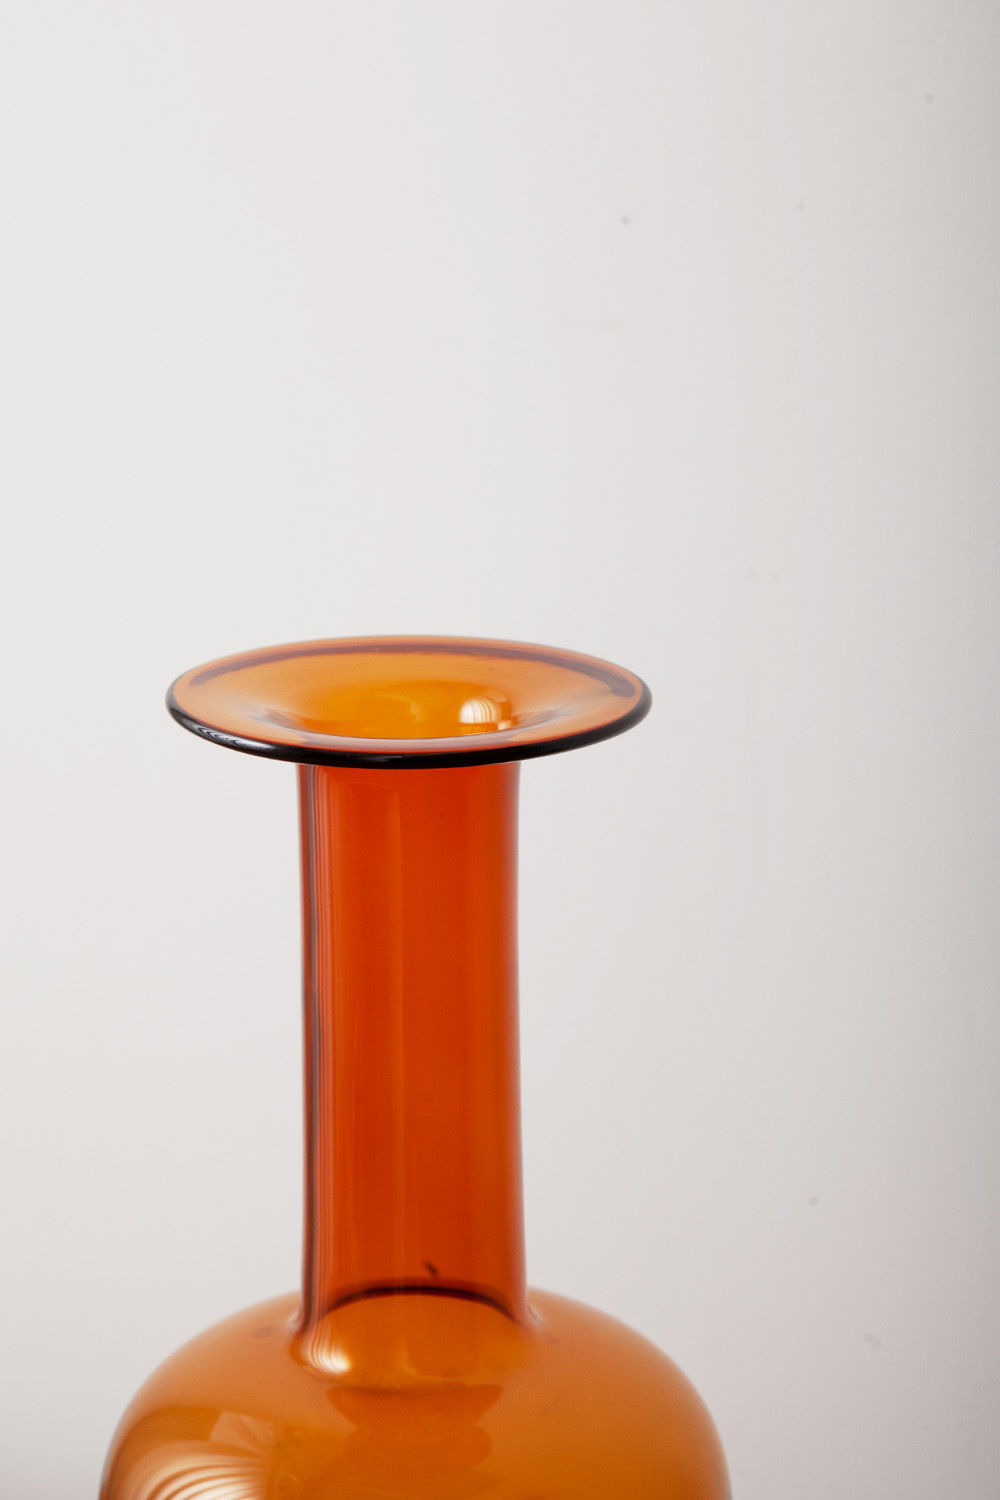 stoop | GUL VASE in Amber by Otto Brawer for HOLMEGAARD